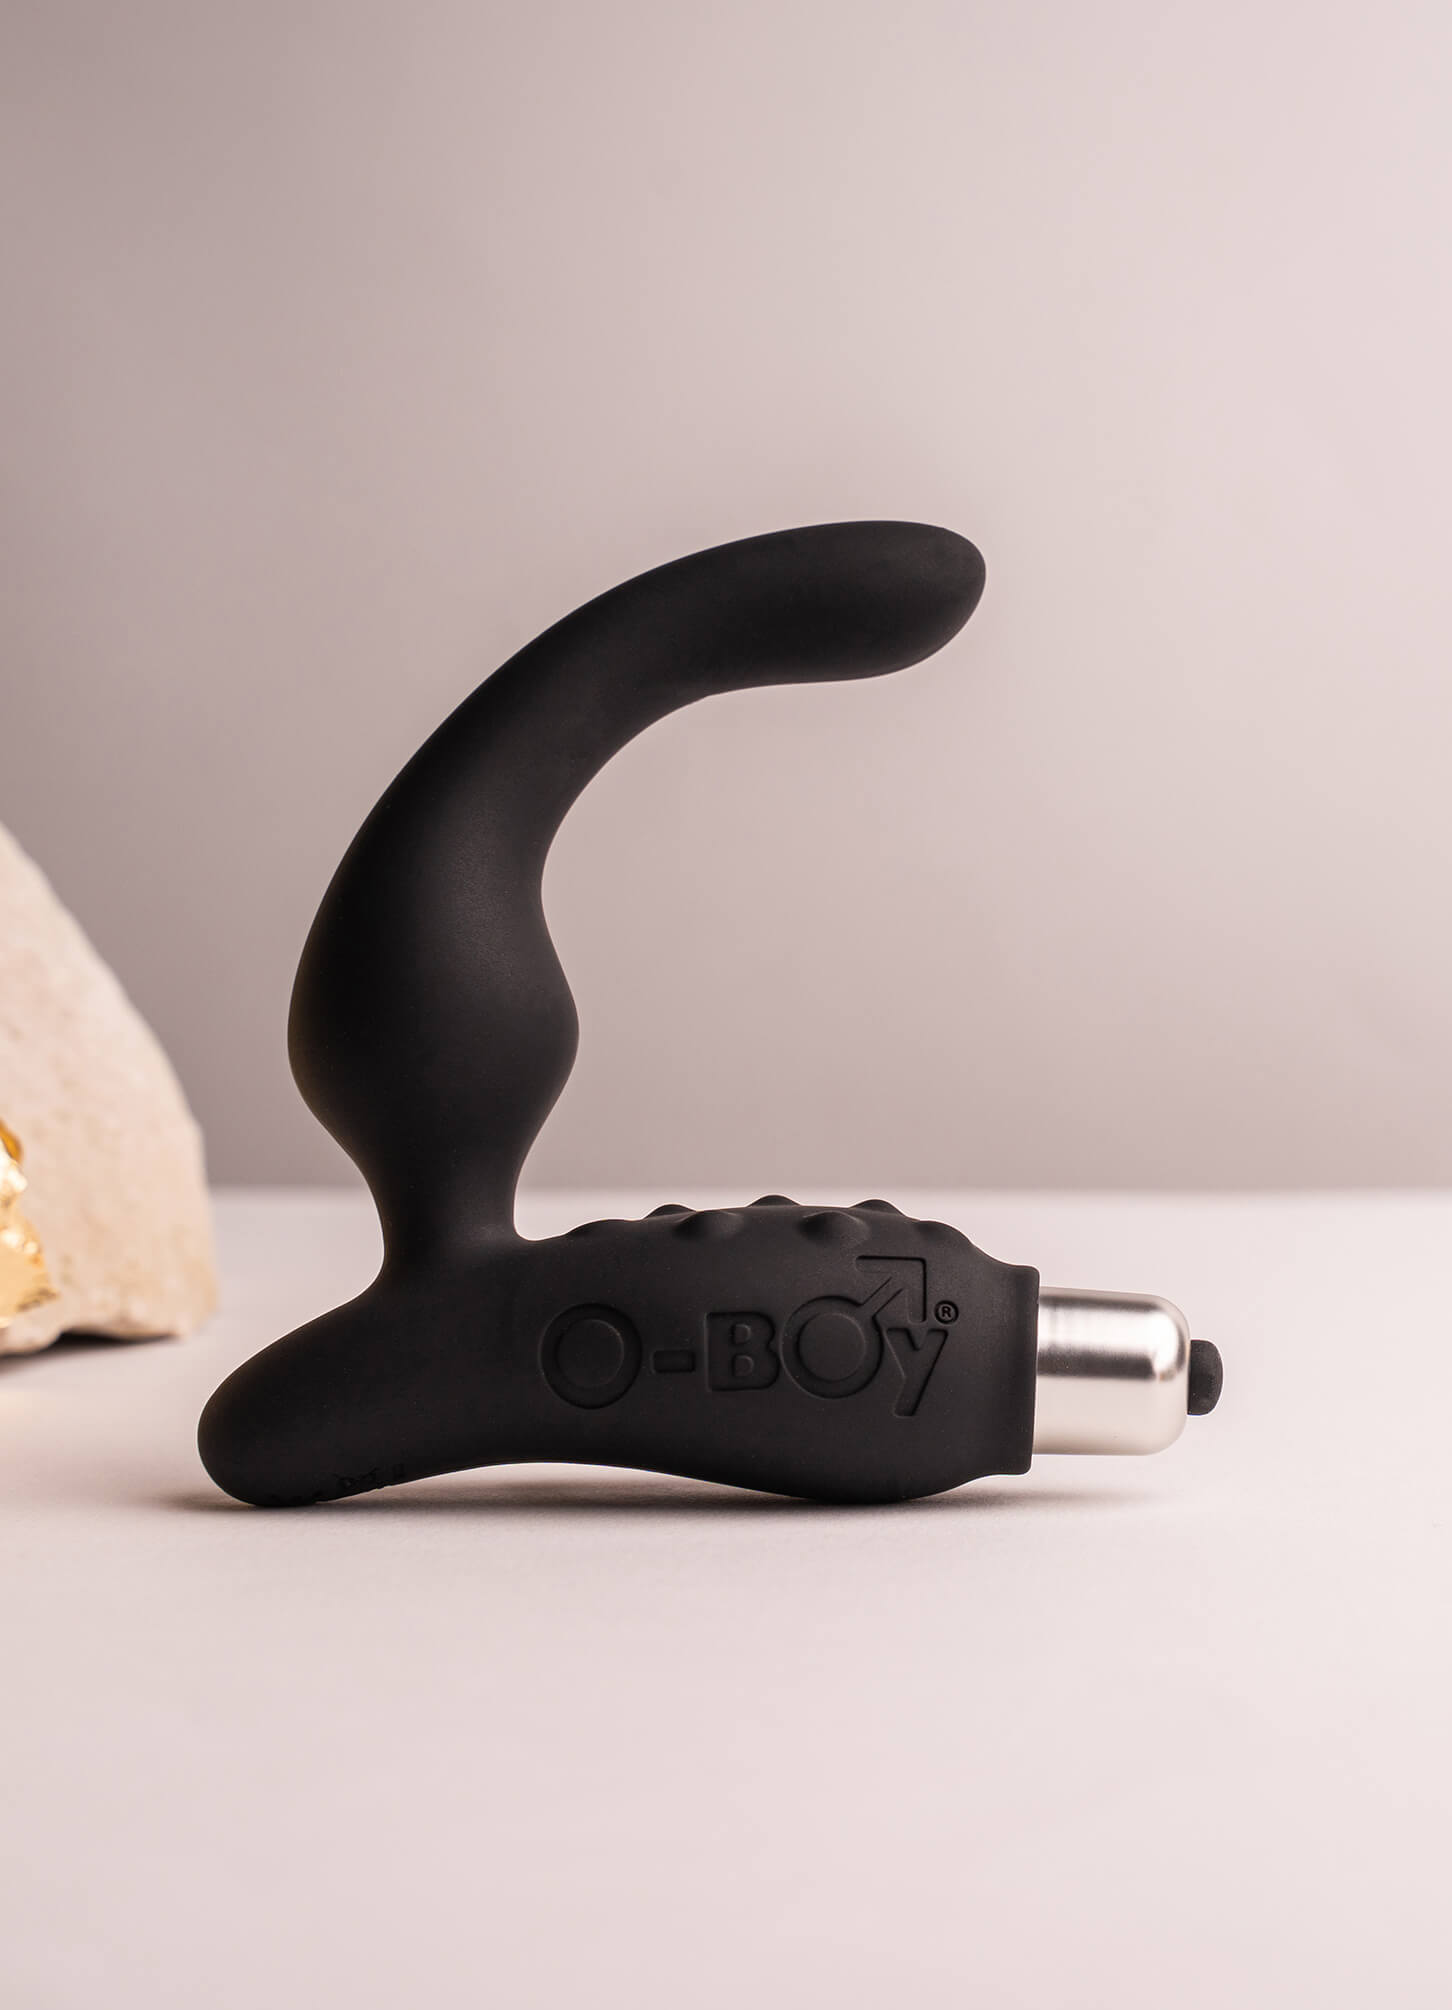 Silicone vibrating prostate massager with perineum pleasure points in black housing a removable bullet vibrator.